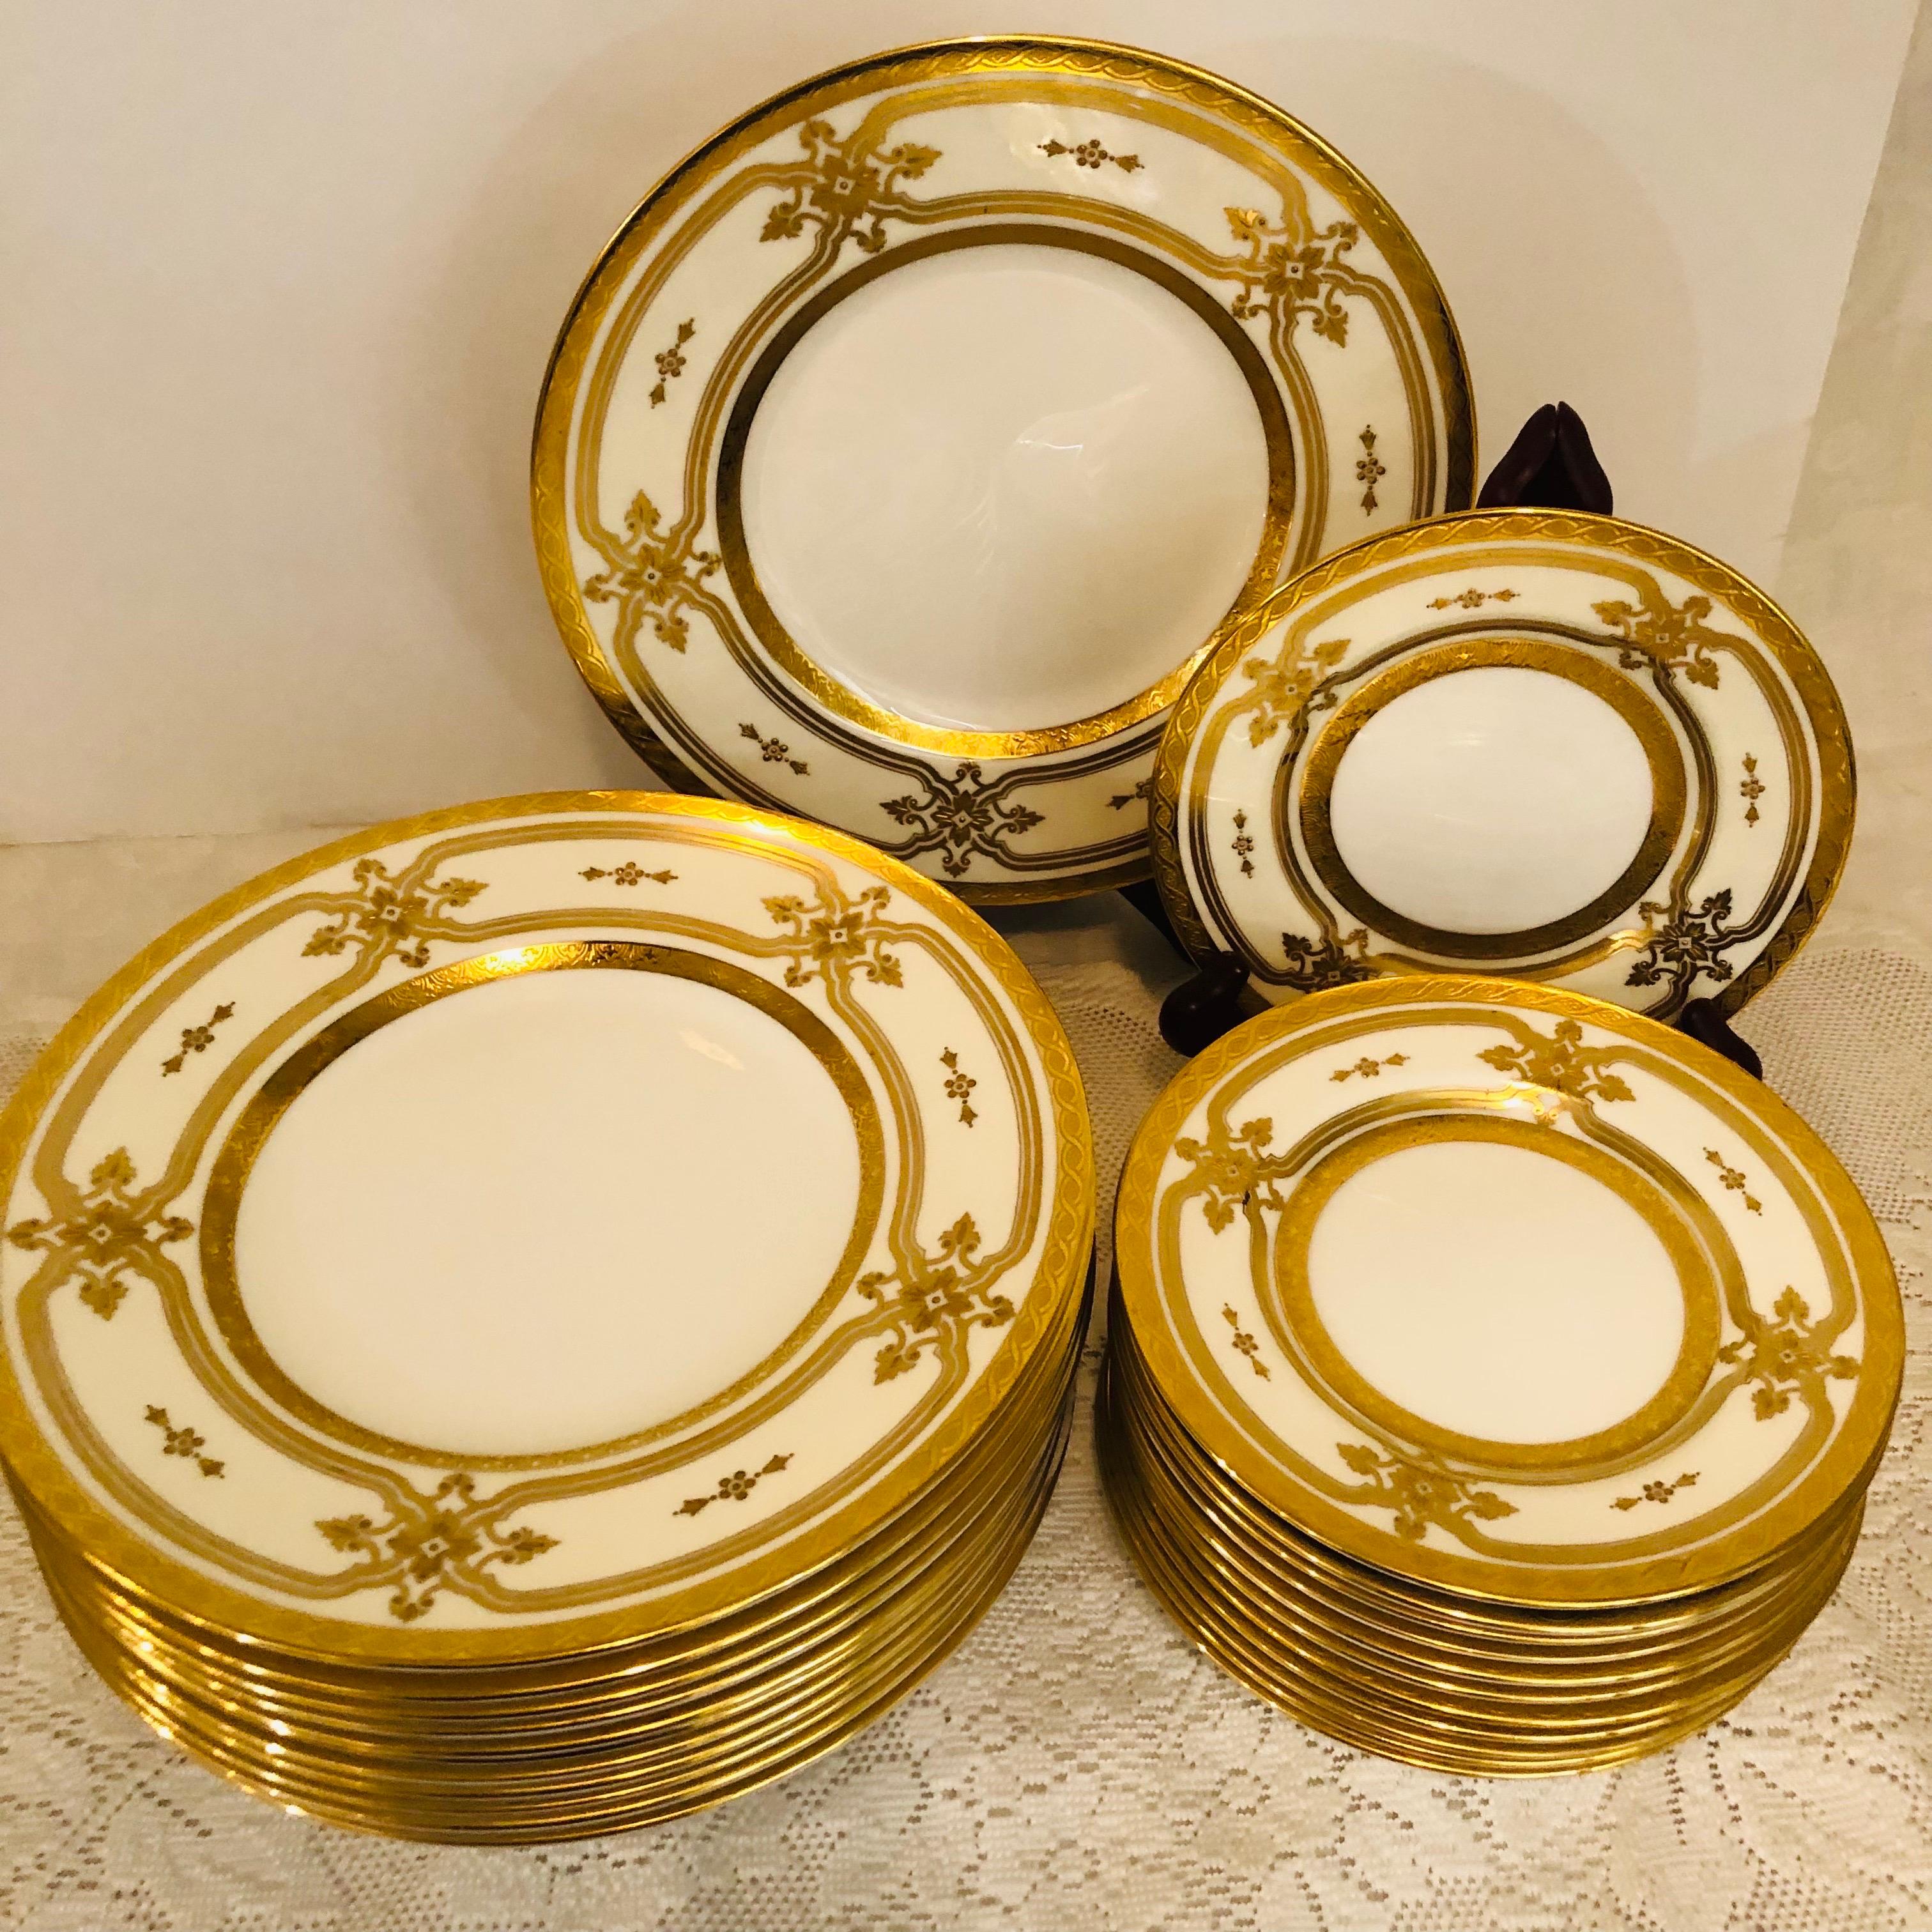 Set of Minton Made for Tiffany & Co. Plates with 12 Luncheon and 12 Bread Plates 2